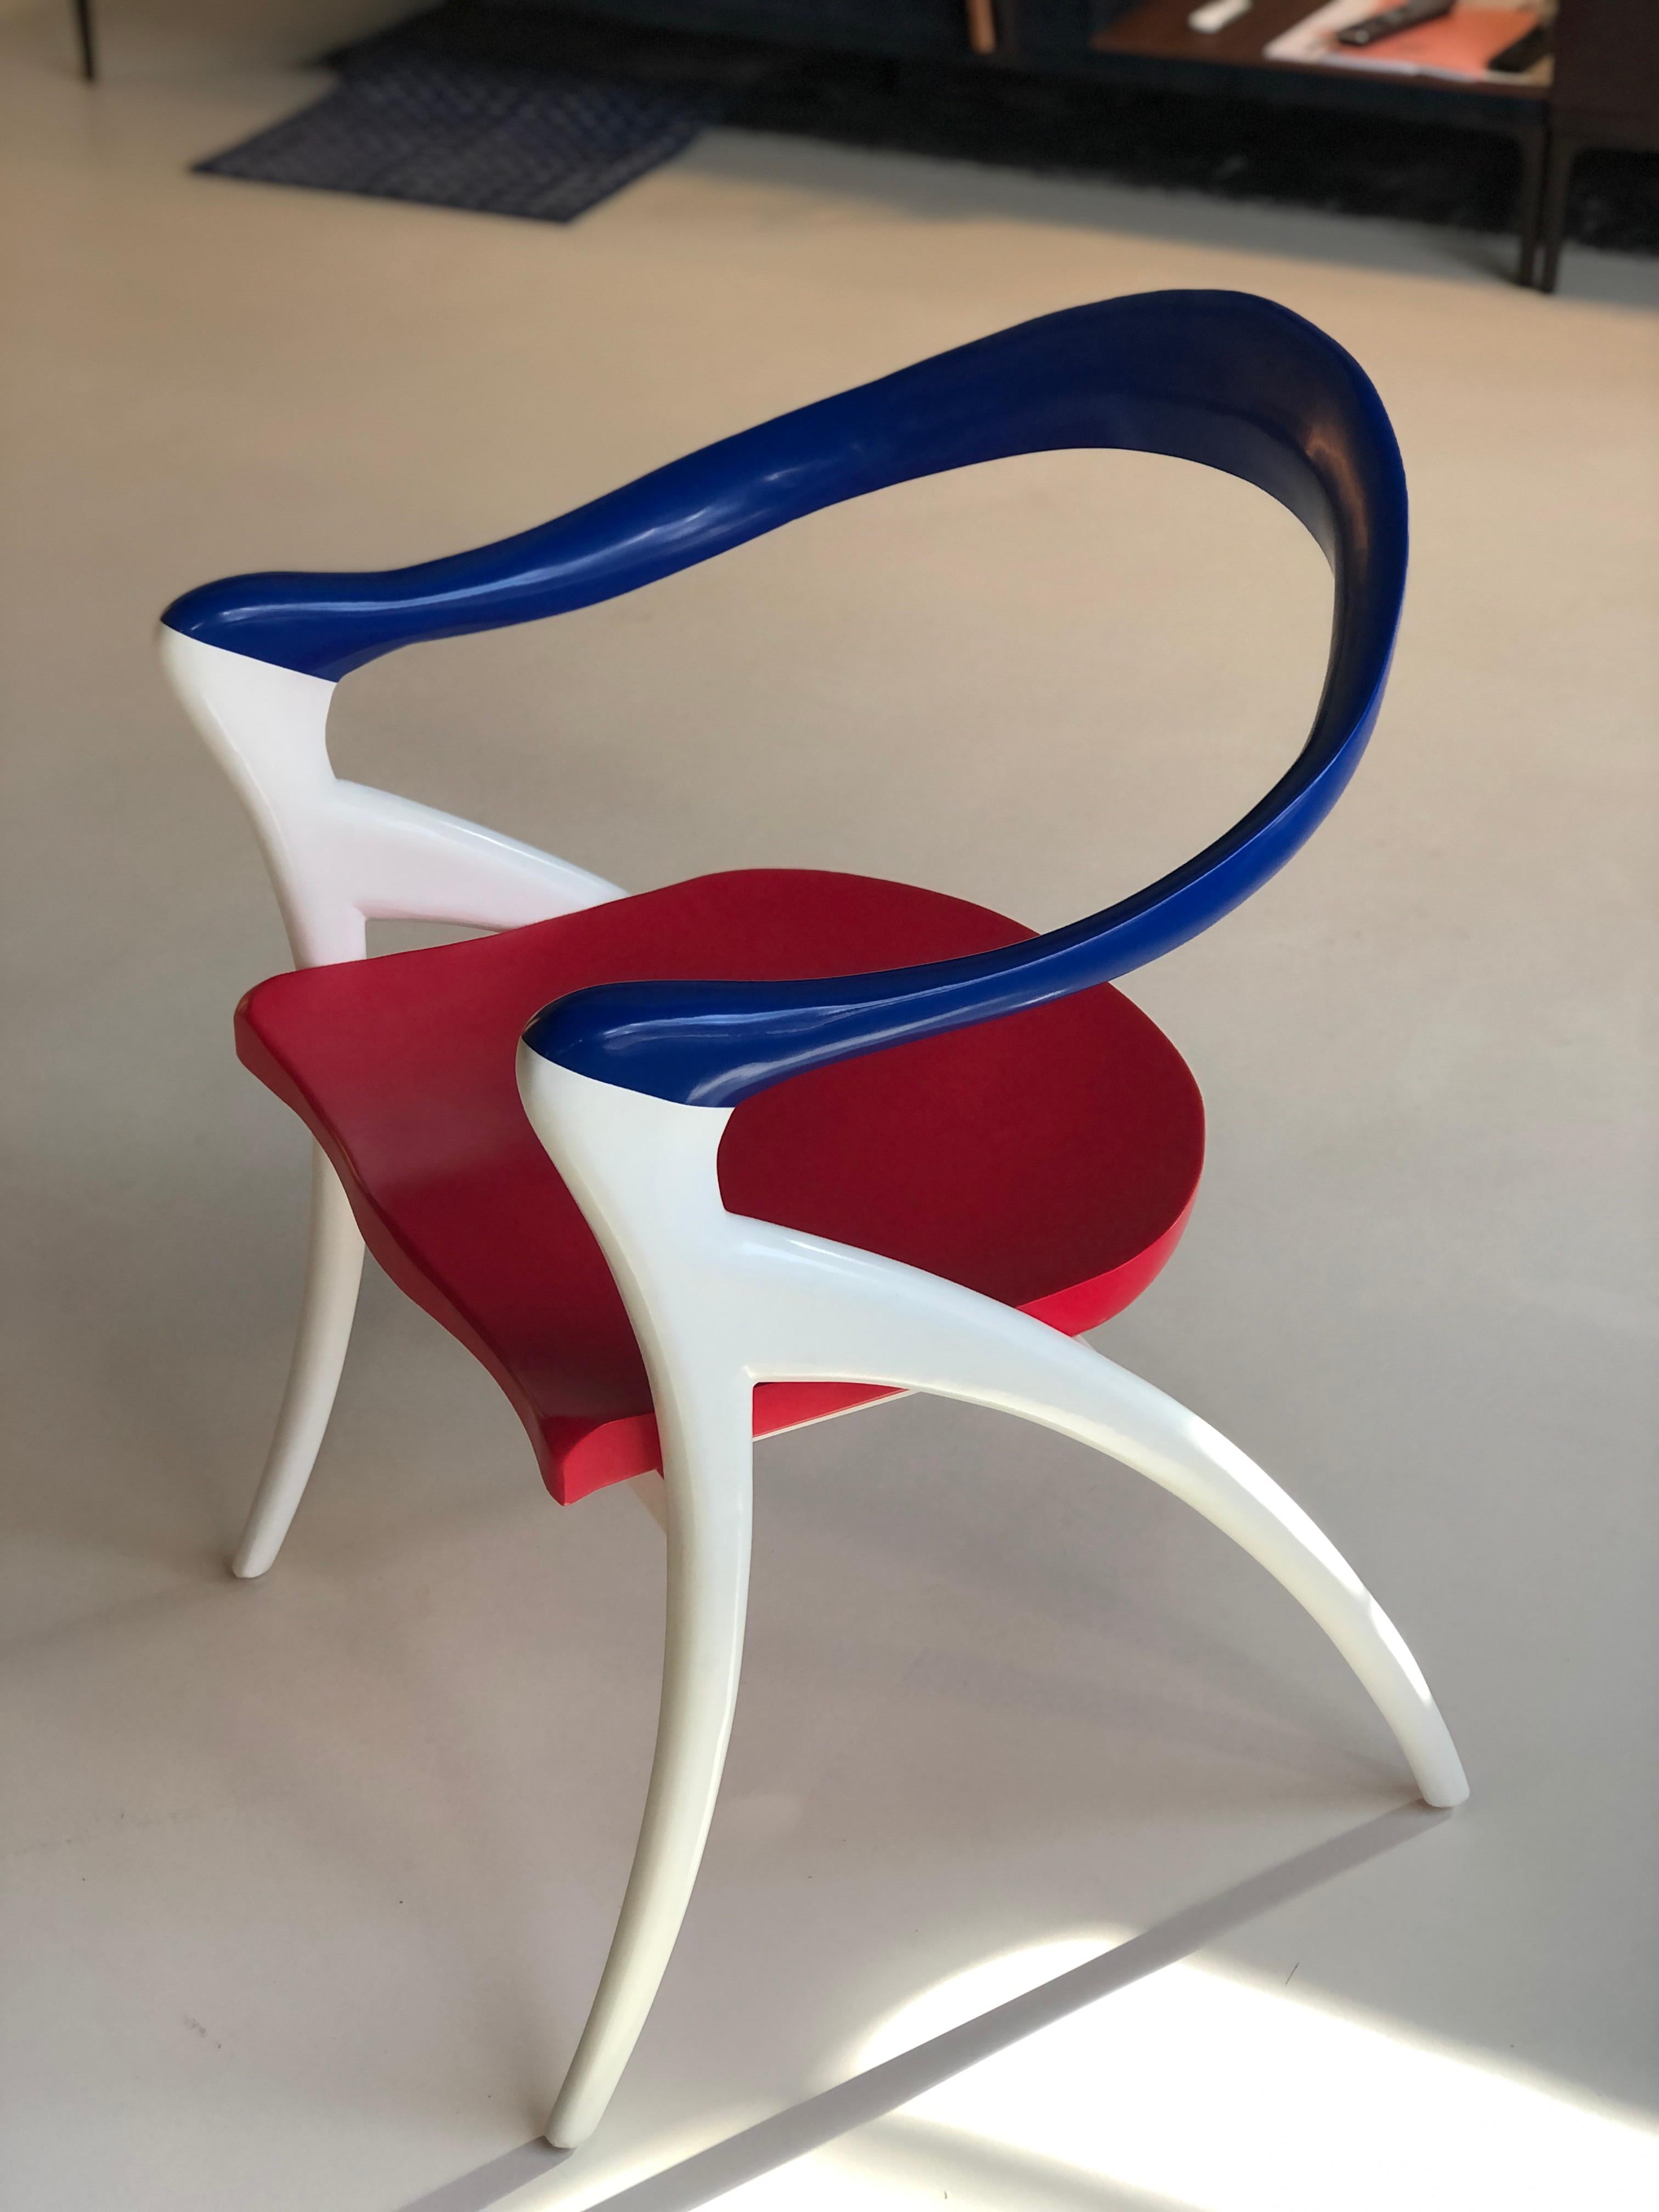 Grands fauteuils by Olivier de Schrijver (born in 1958) Model Ode à la femme with mahogany wavy headband extended by the armrests and the base, curved seats. Painted in the colors of the French flag.
Belgium, 2021.